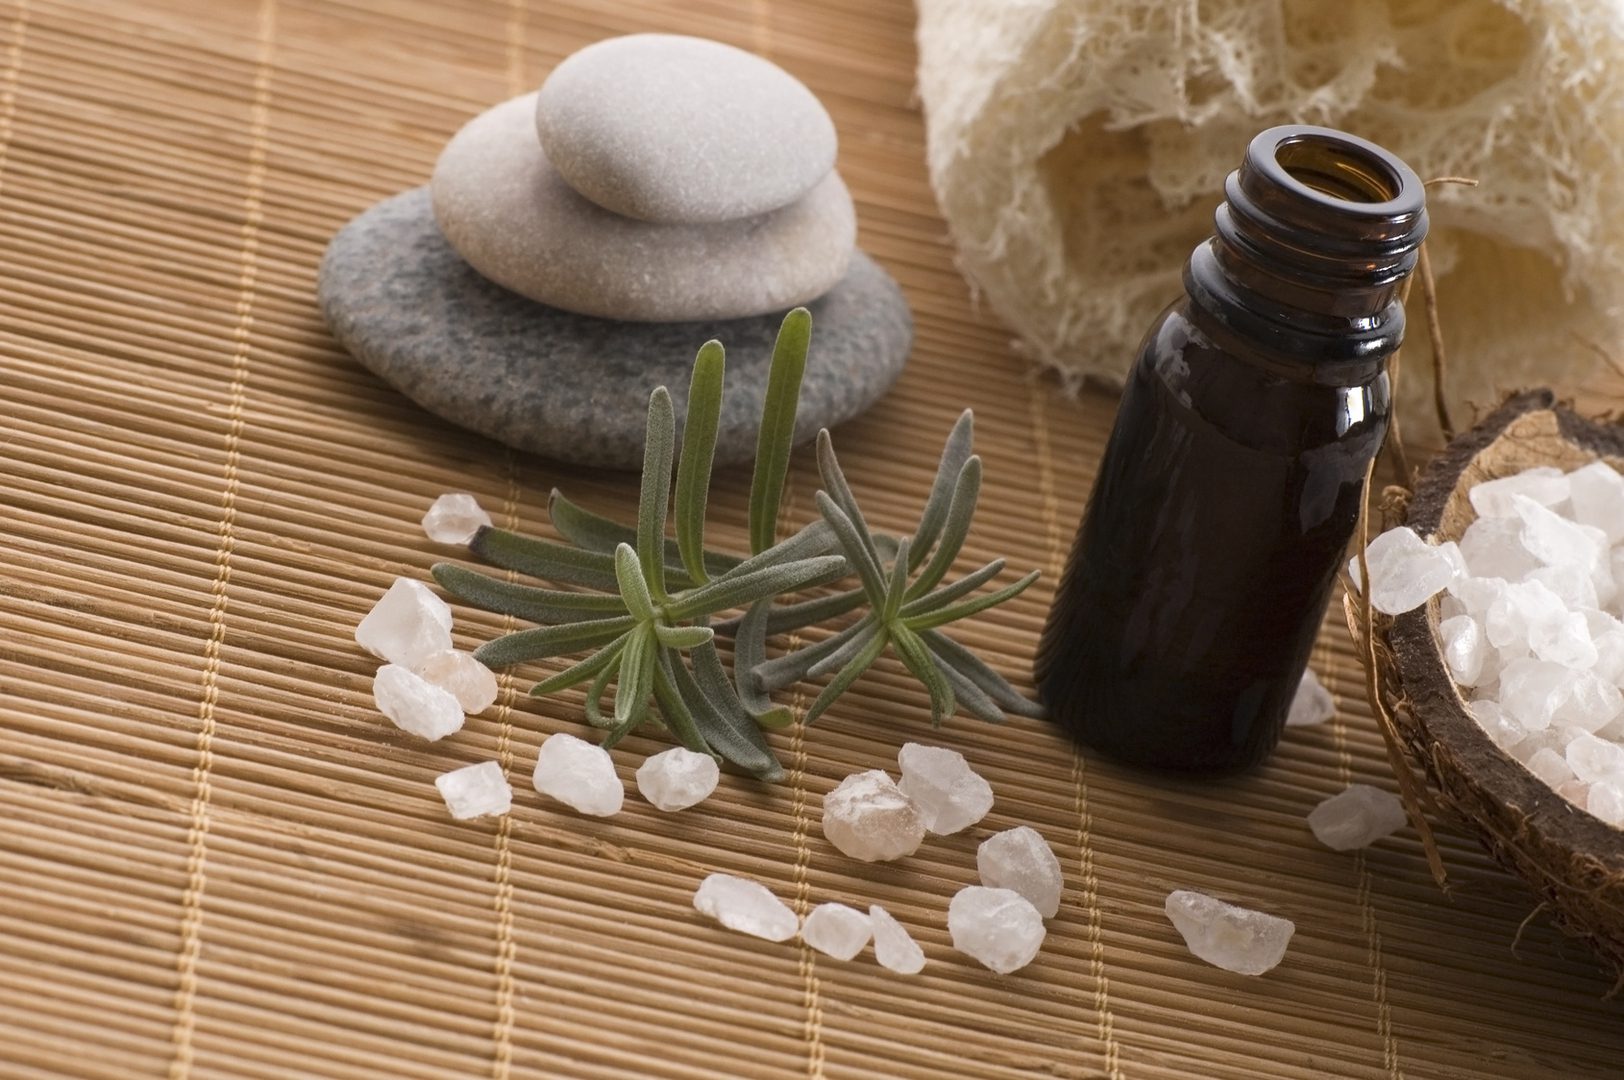 A bottle of essential oil and some rocks on the floor.